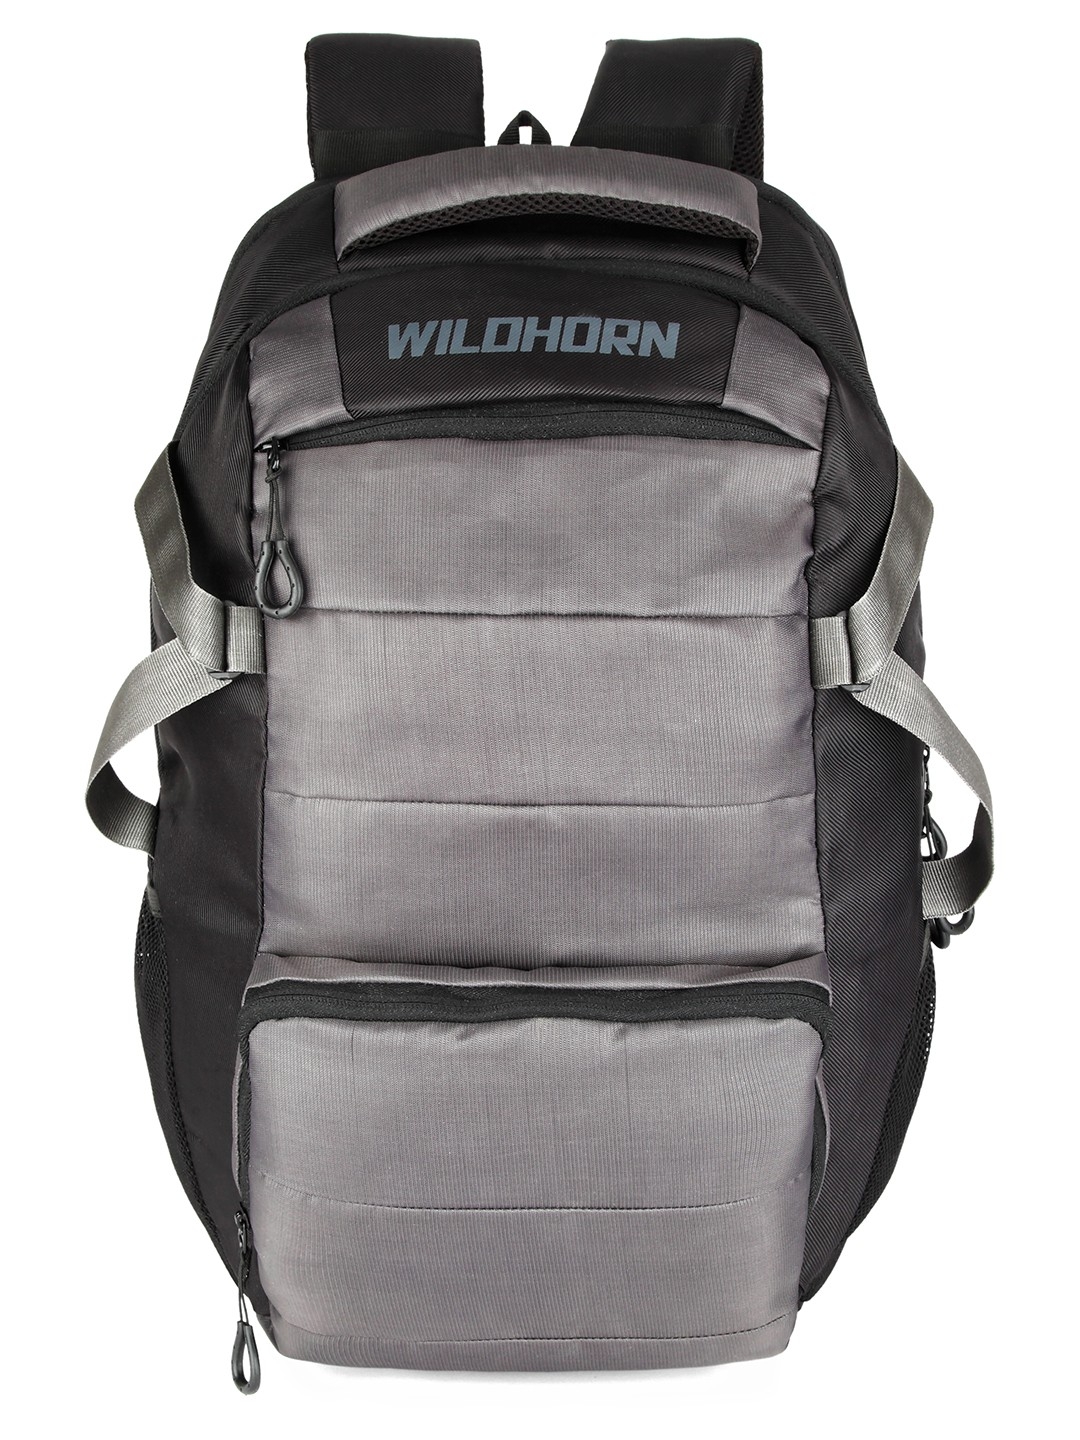 WildHorn | WILDHORN Laptop Backpack for Men & Women, Extra Large 30L Travel Backpack with Multi Zip Compartment, Business College Bookbag Fit 17 Inch Laptop